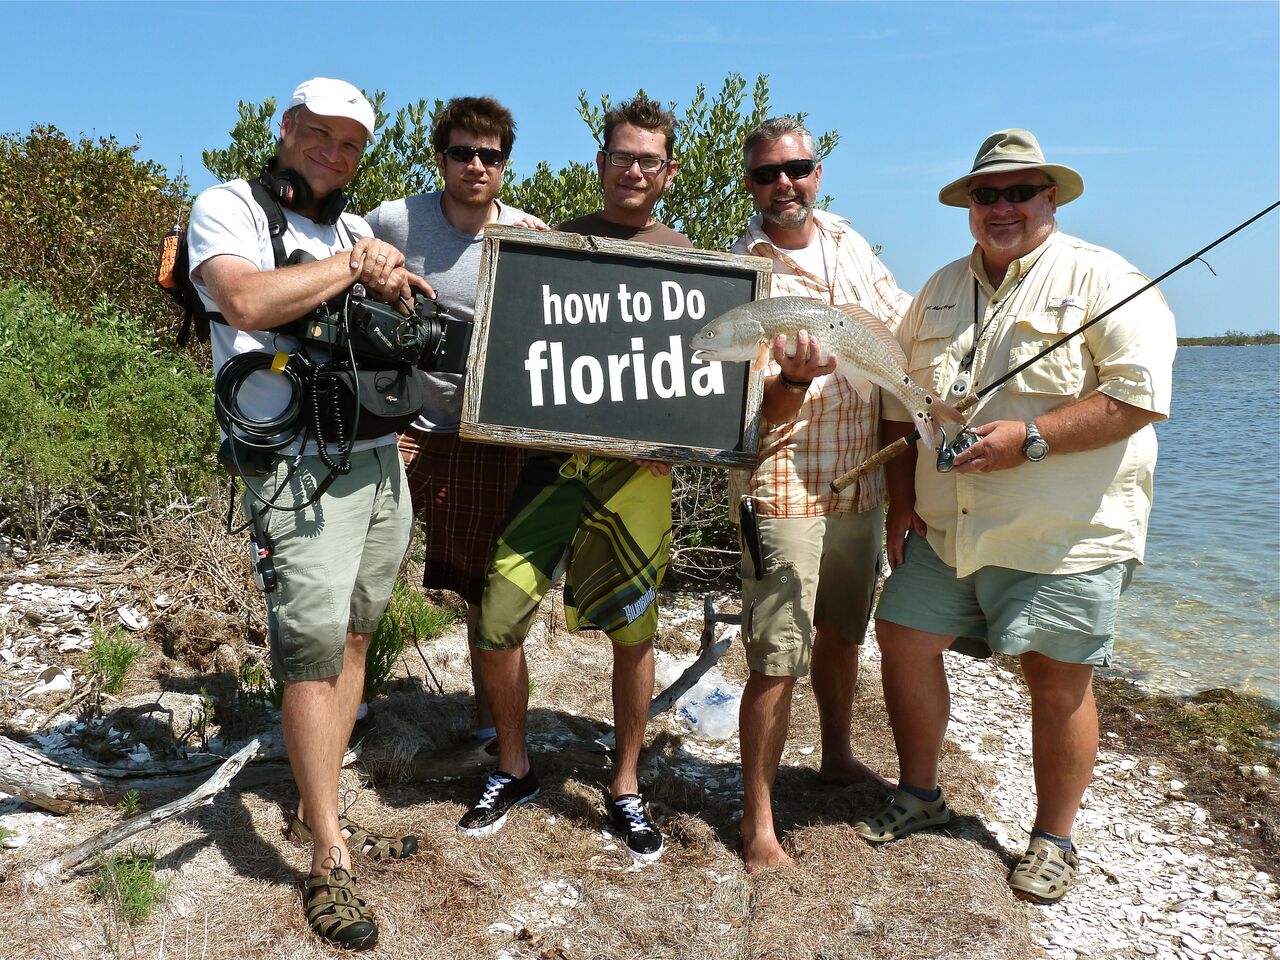 Chad and his crew filming an episode of "how to Do florida"